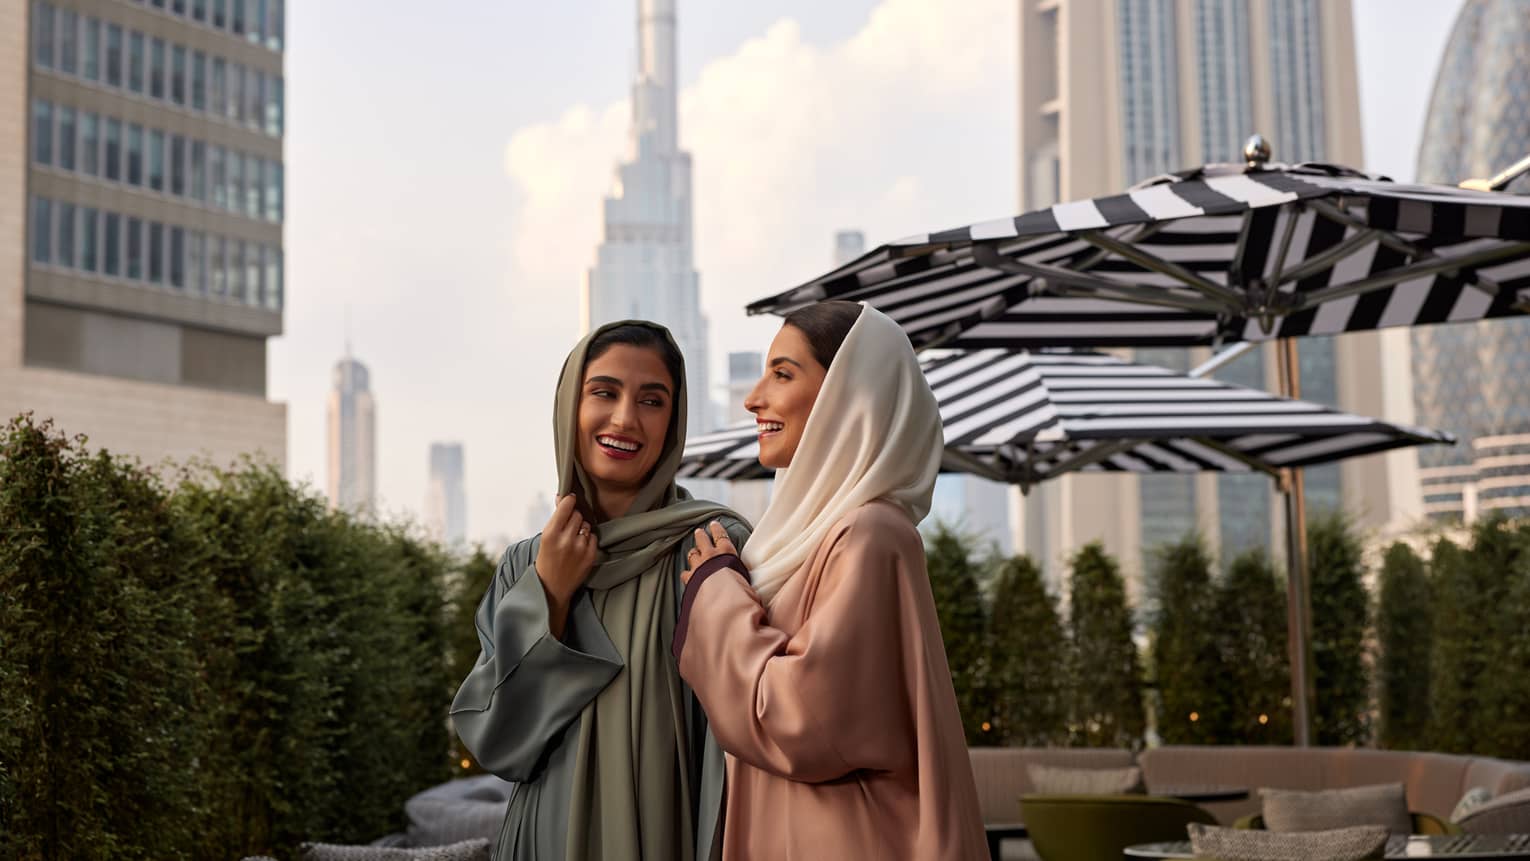 Two women wearing headscarves smile while walking through an outdoor patio